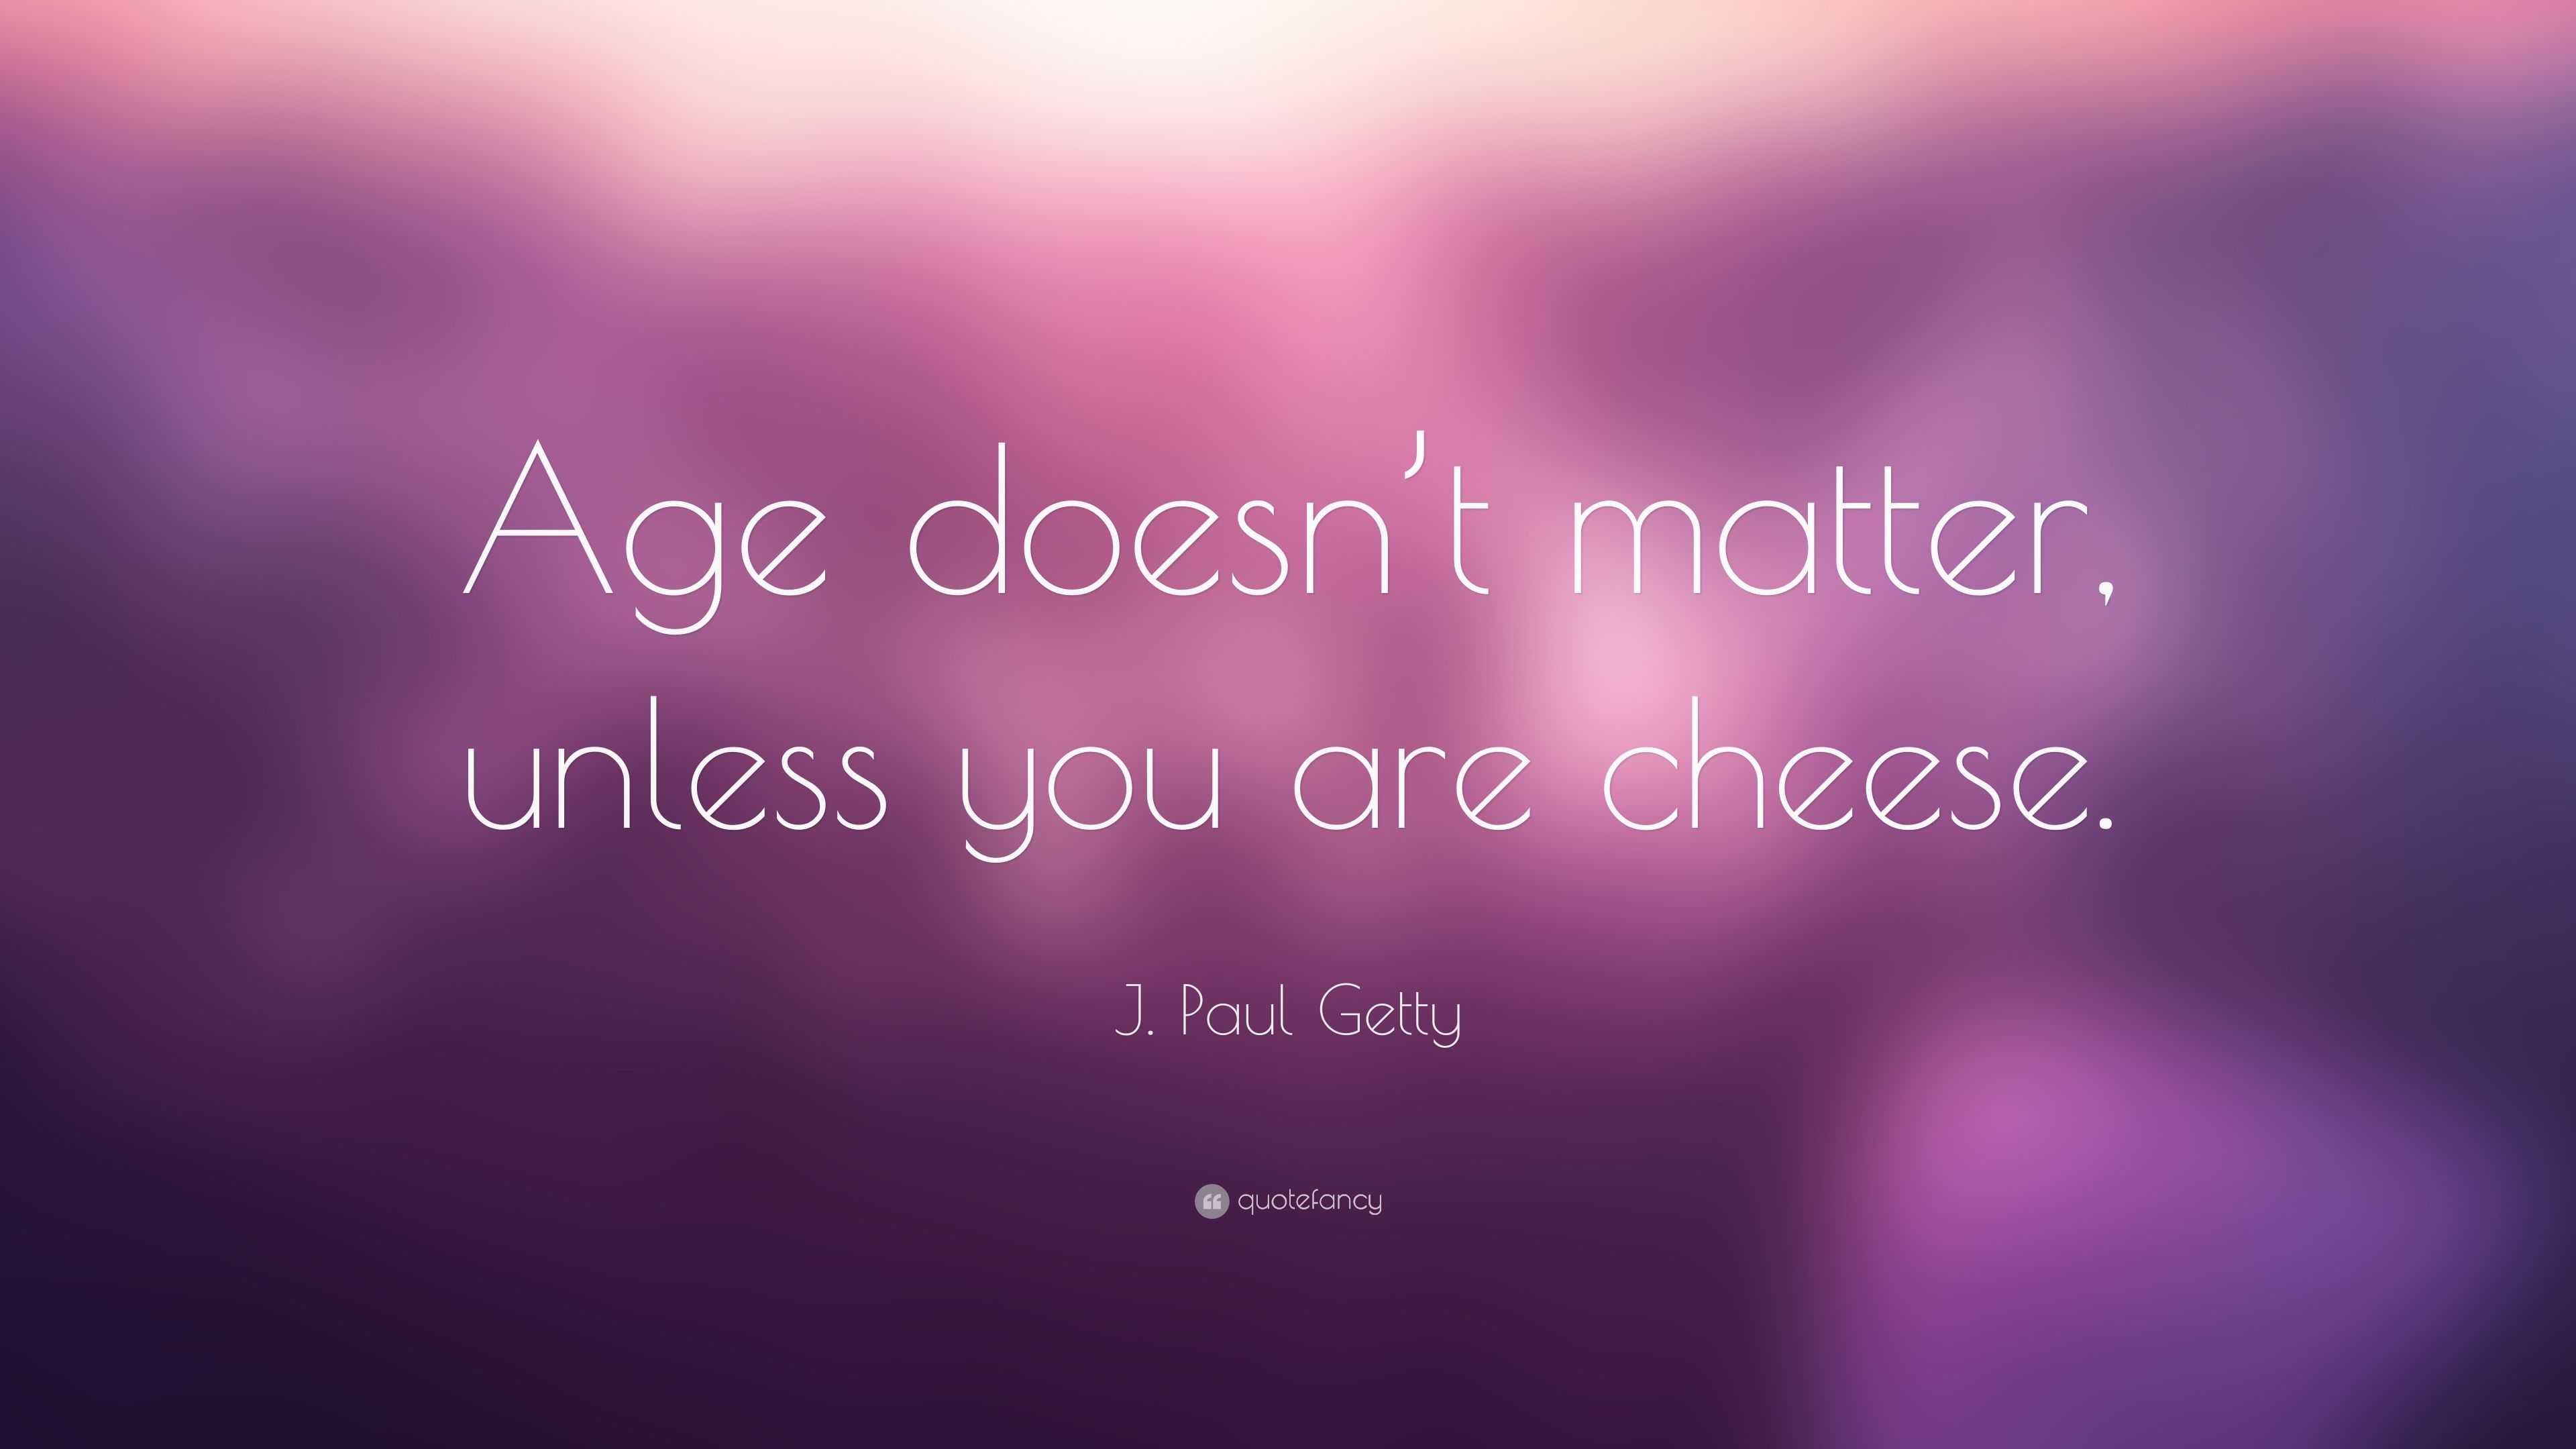 https://quotefancy.com/media/wallpaper/3840x2160/4370221-J-Paul-Getty-Quote-Age-doesn-t-matter-unless-you-are-cheese.jpg